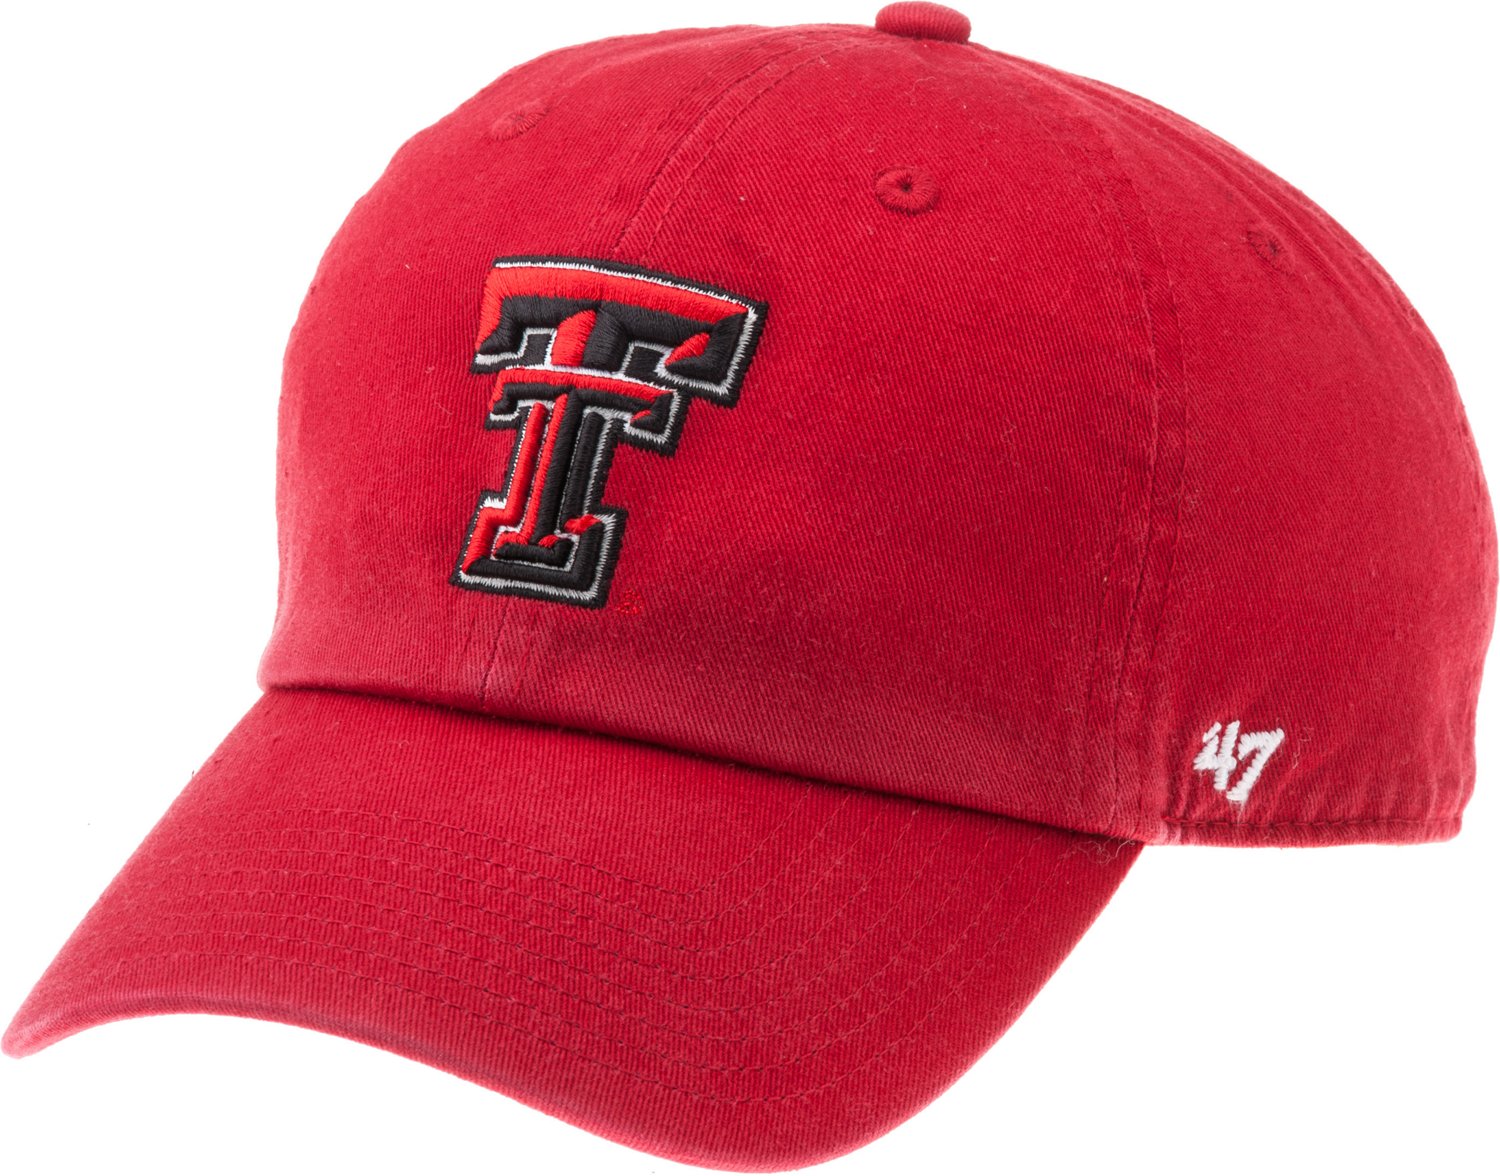 NCAA Texas Tech Red Raiders Premium Collection One-fit Memory Fit Hat Black Adjustable 